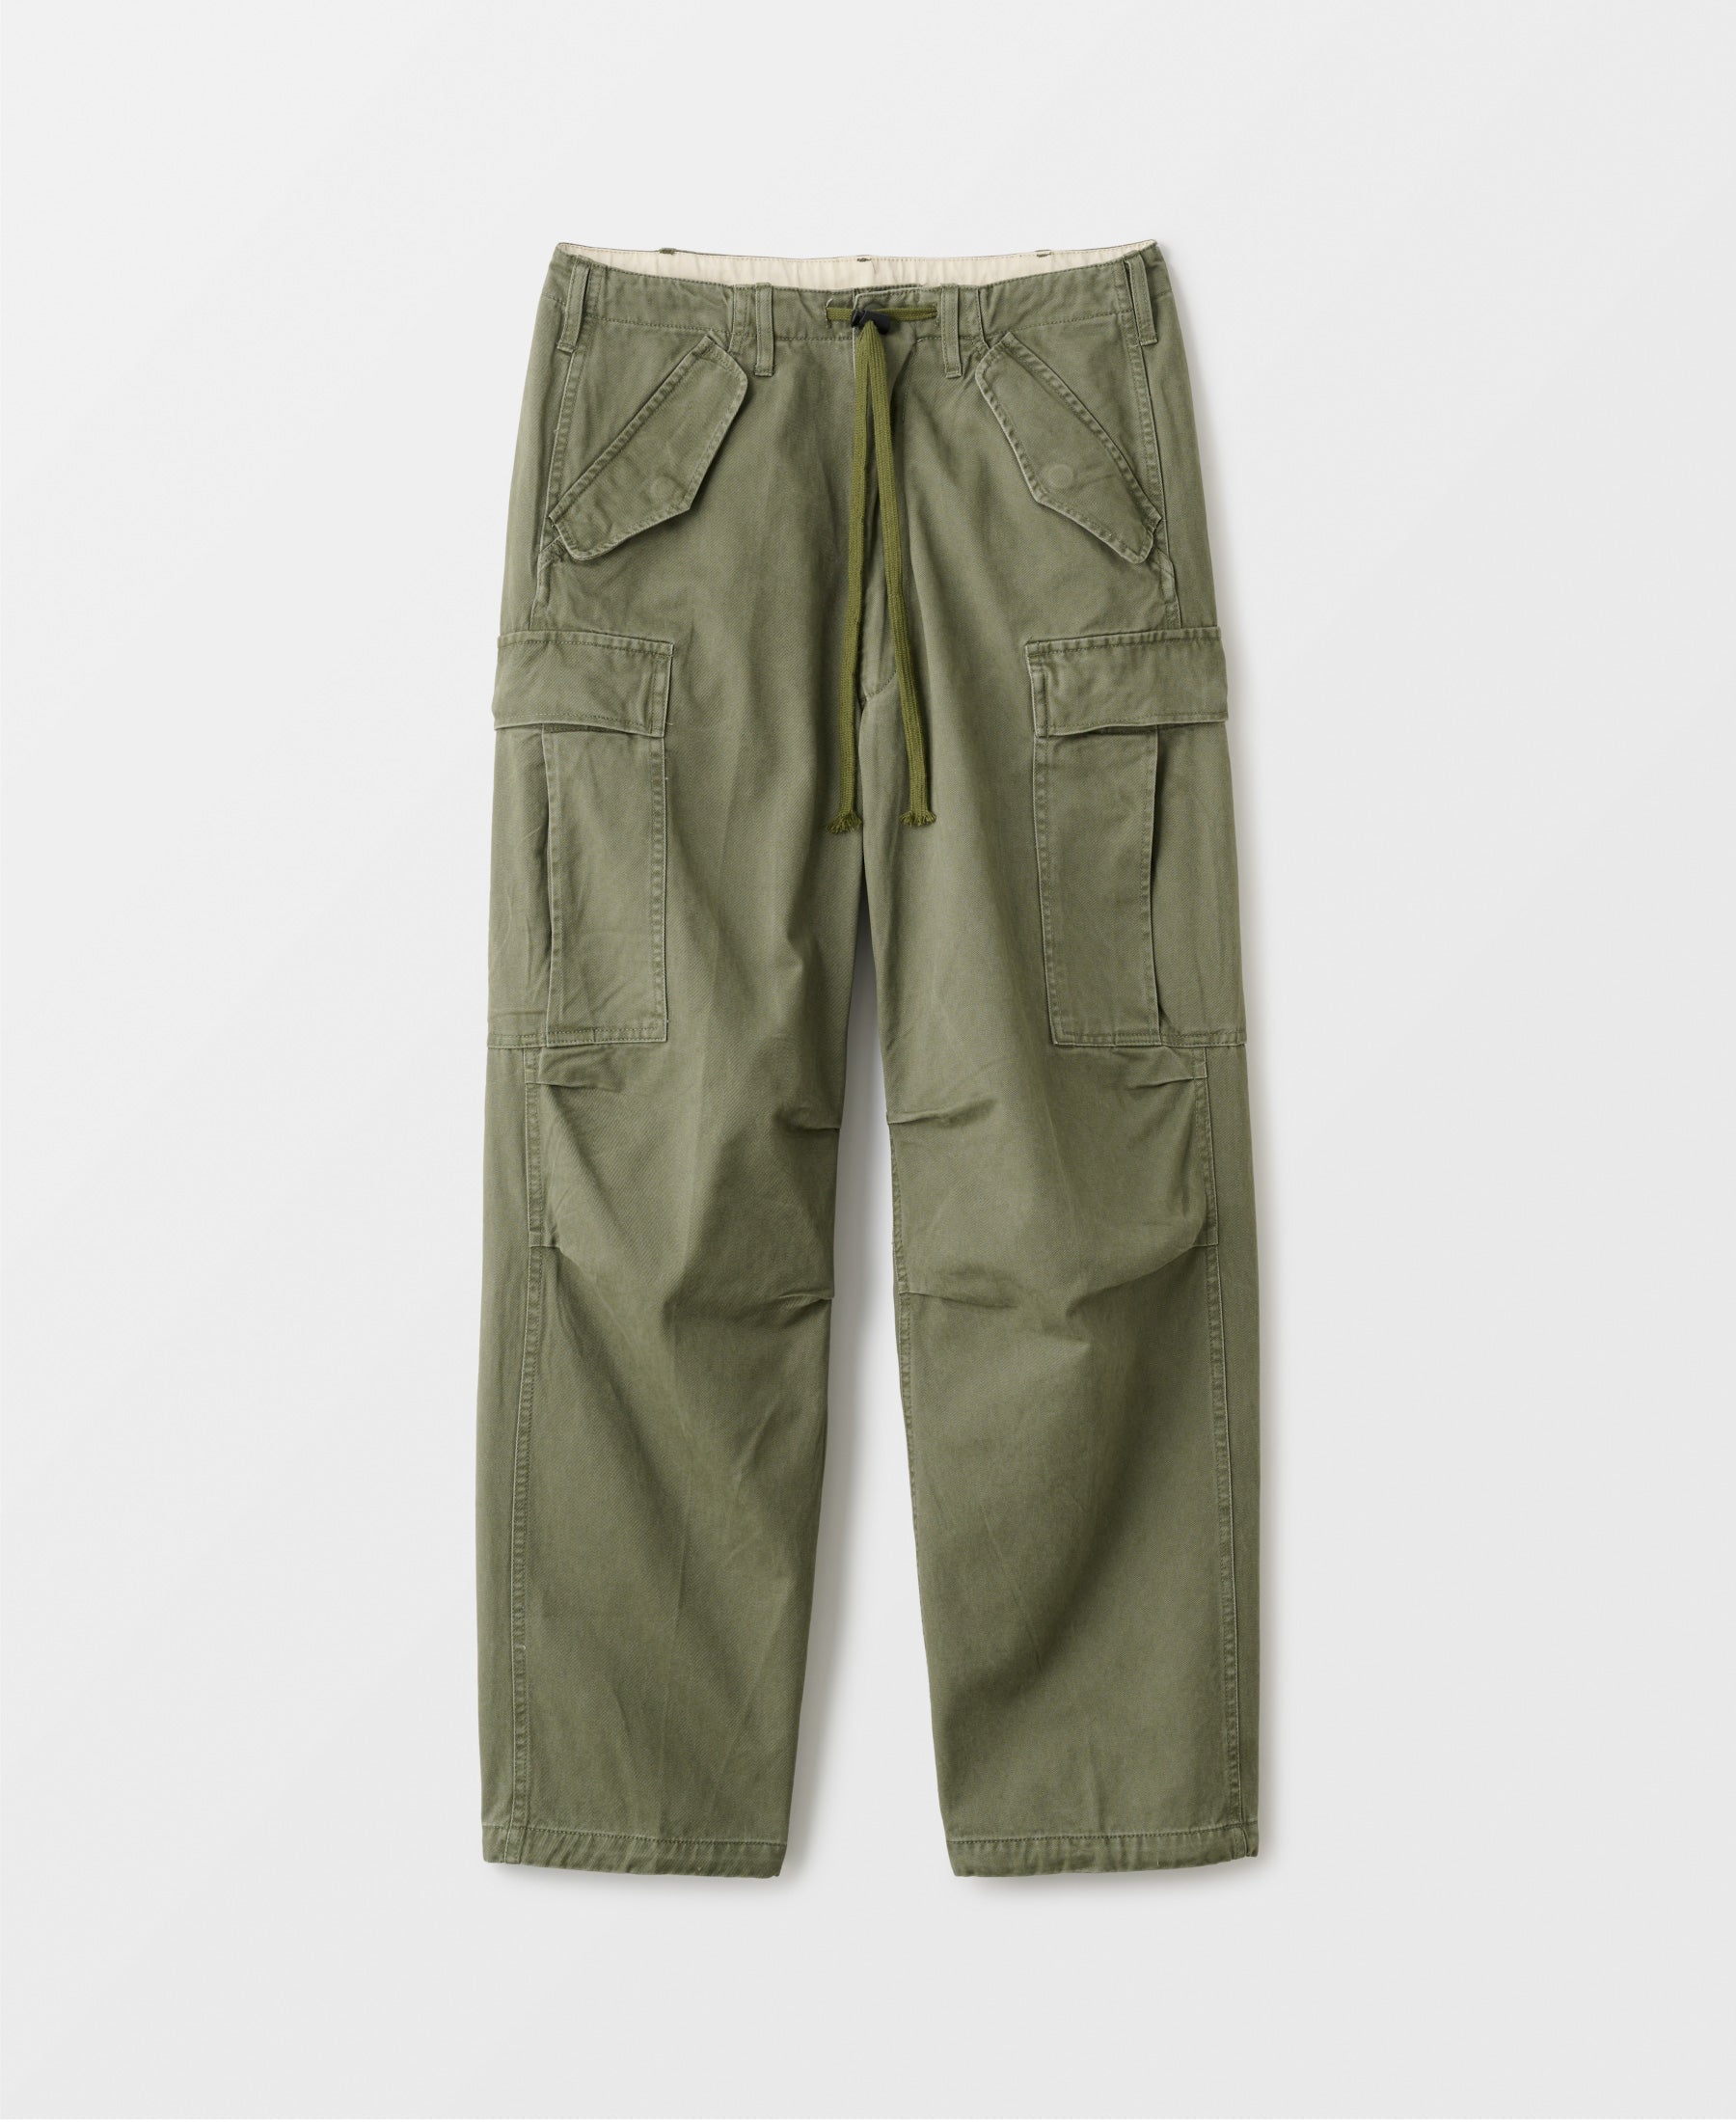 23AW | M65 Field Cargo Trousers - Olive Drab